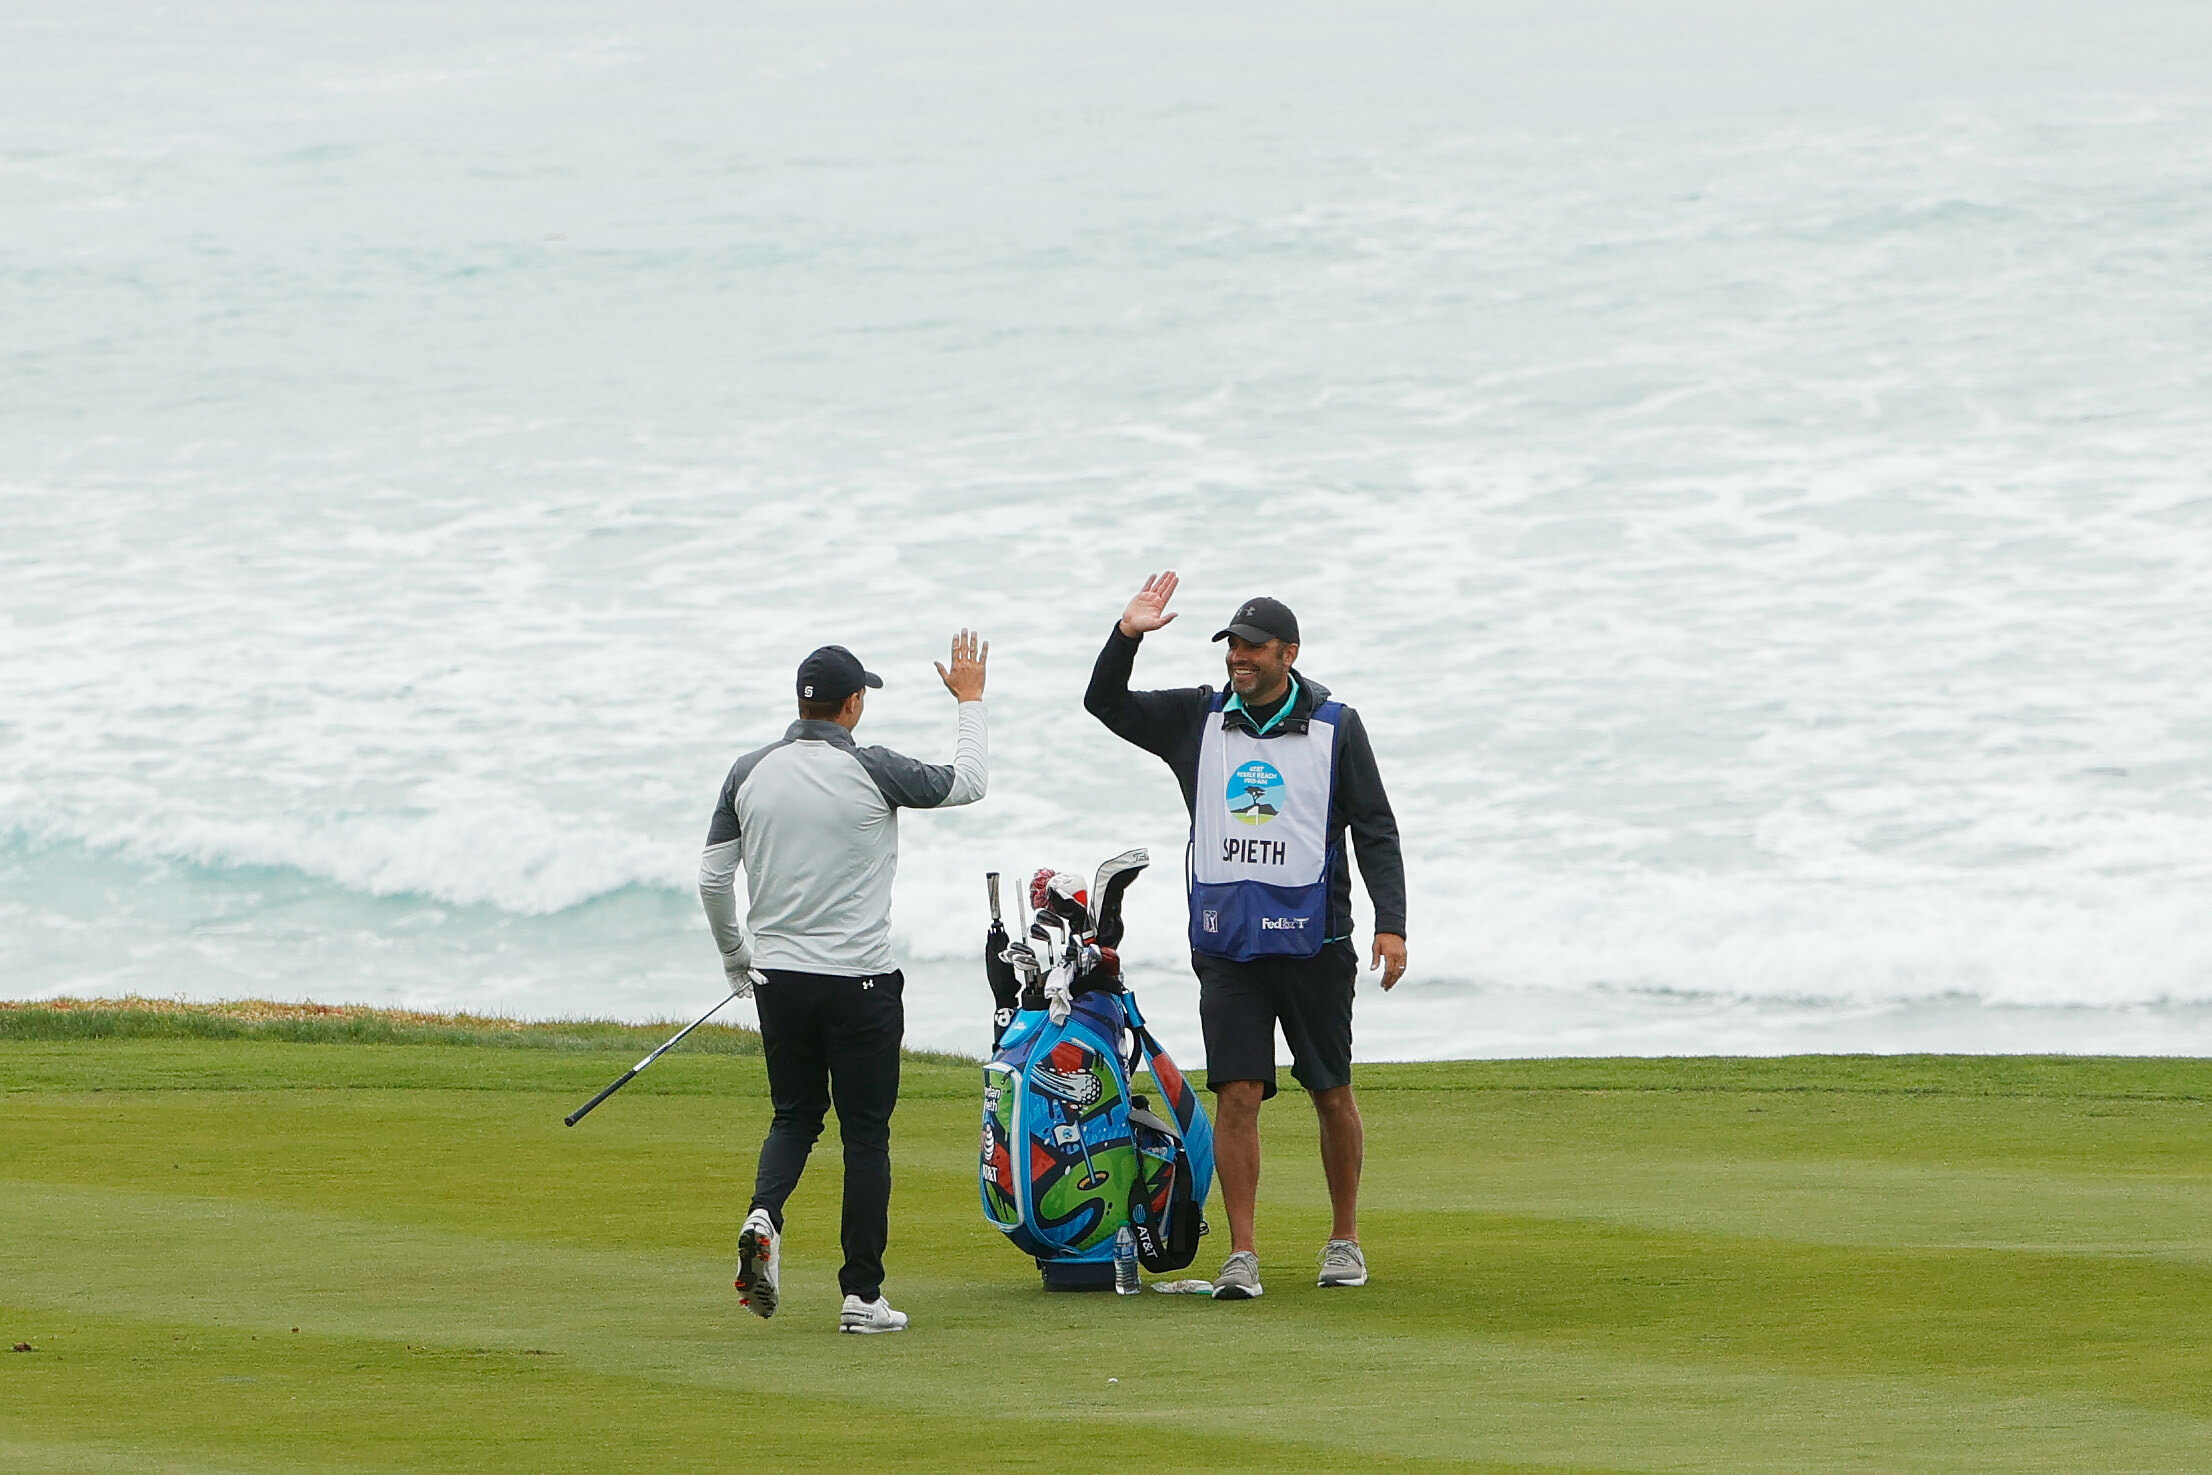  PEBBLE BEACH, CALIFORNIA - FEBRUARY 11: Jordan Spieth of the United States and caddie Michael Greller celebrate his eagle on the tenth hole during the first round of the AT&T Pebble Beach Pro-Am at Pebble Beach Golf Links on February 11, 2021 in Peb